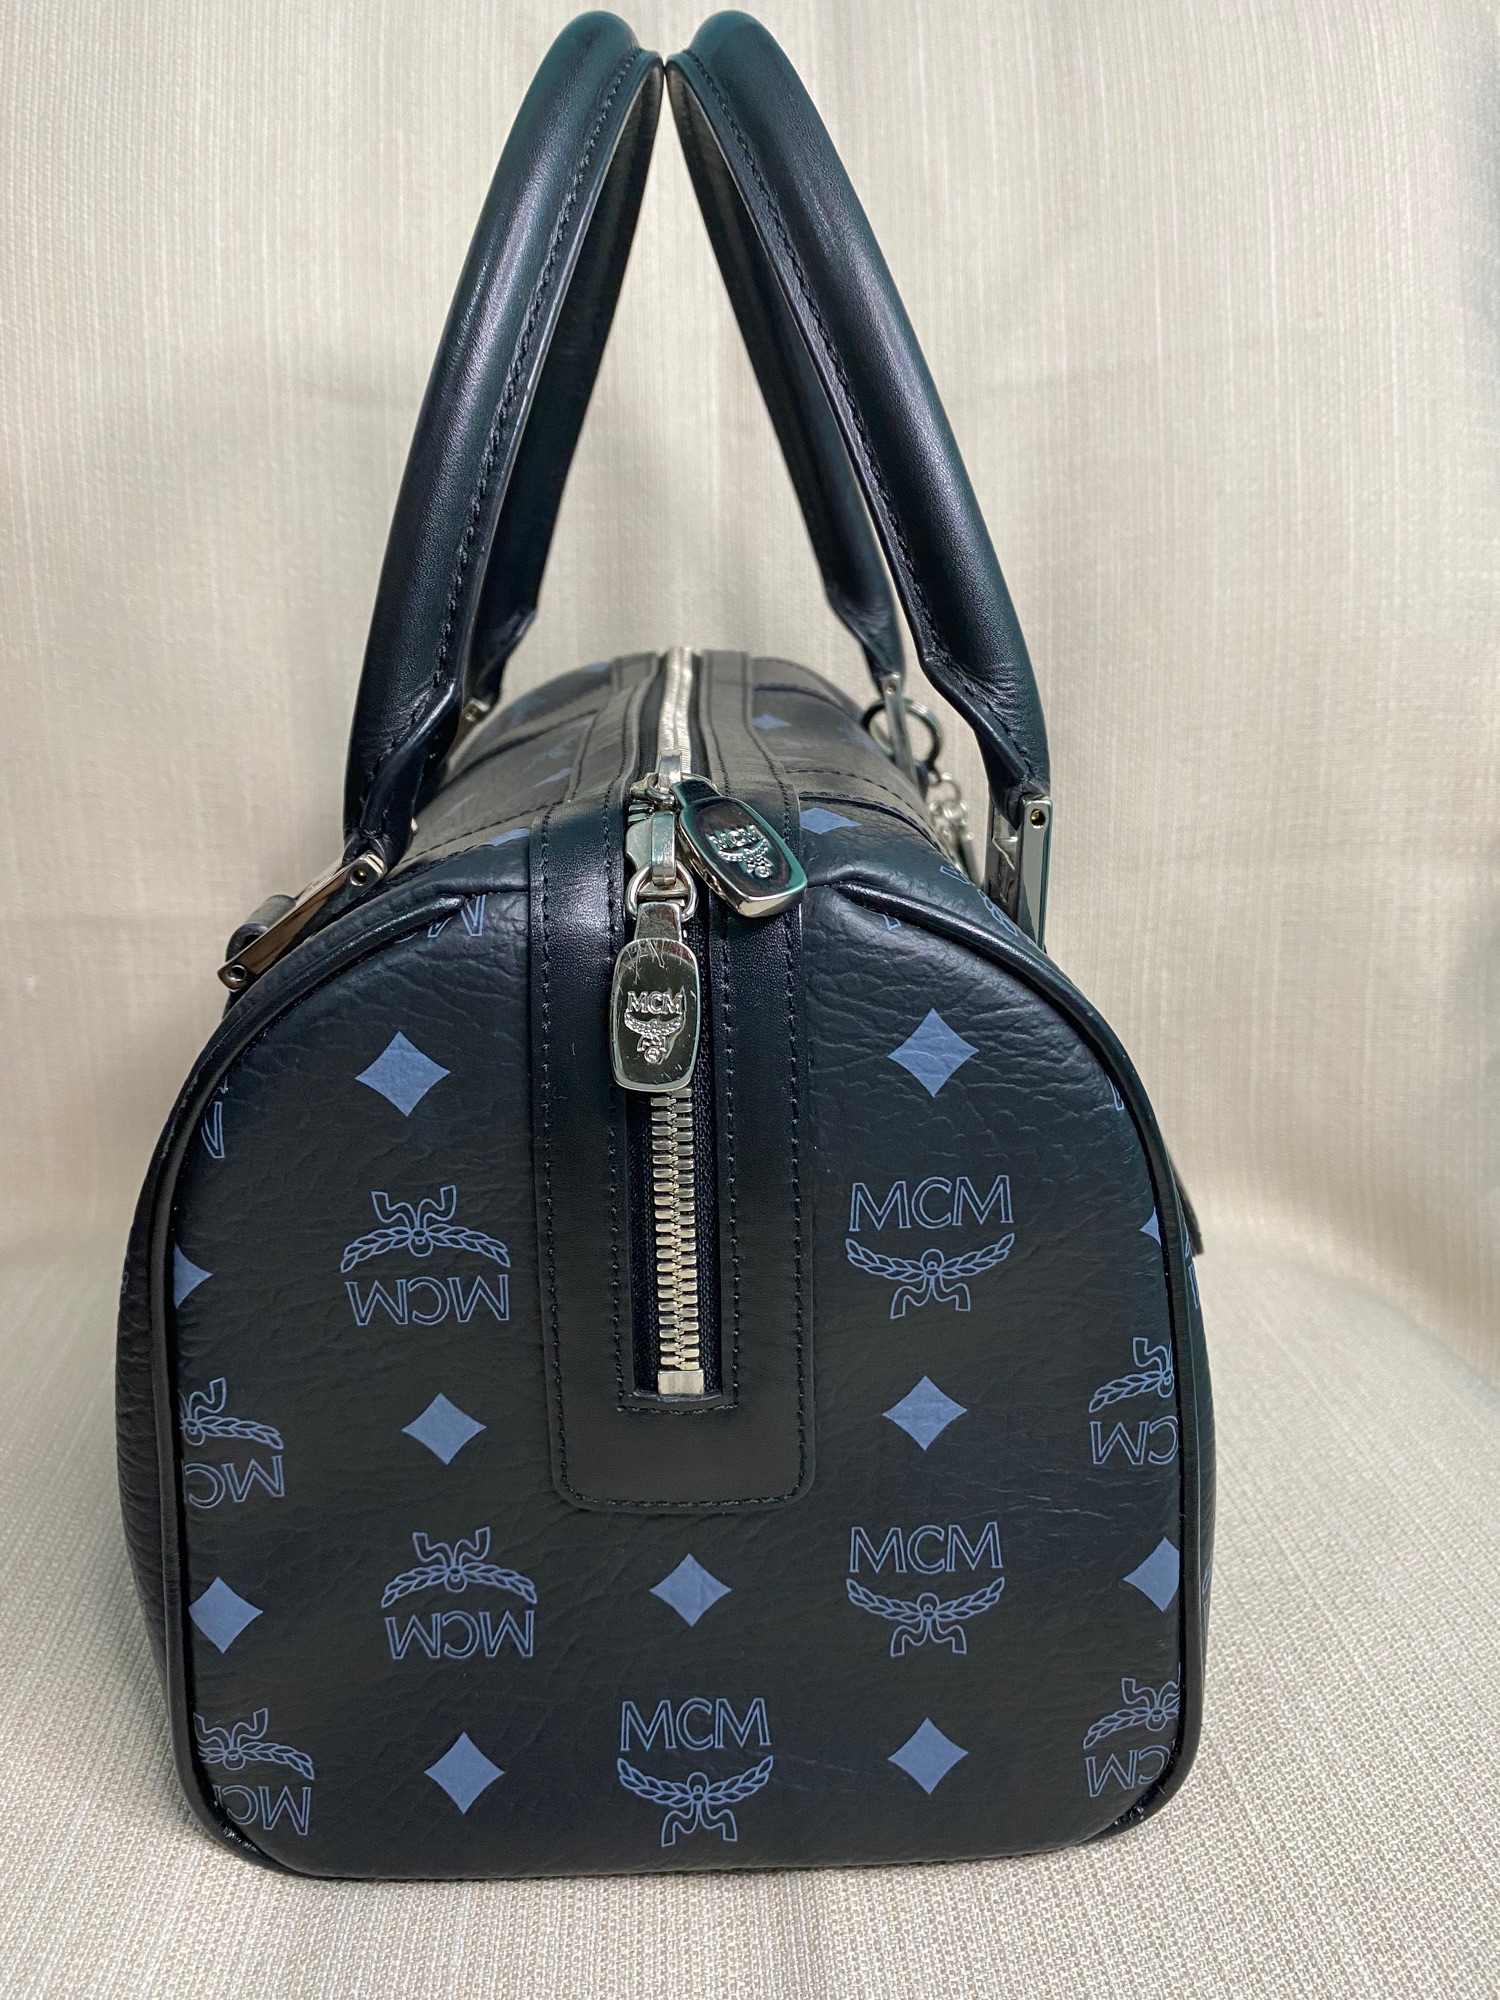 Authentic MCM Doctor's Bag MCM Doctor's Bag Good quality genuine leather  Silver hardwares With Code With MCM bag charm MCM zipper pullers Hologram  inner lining